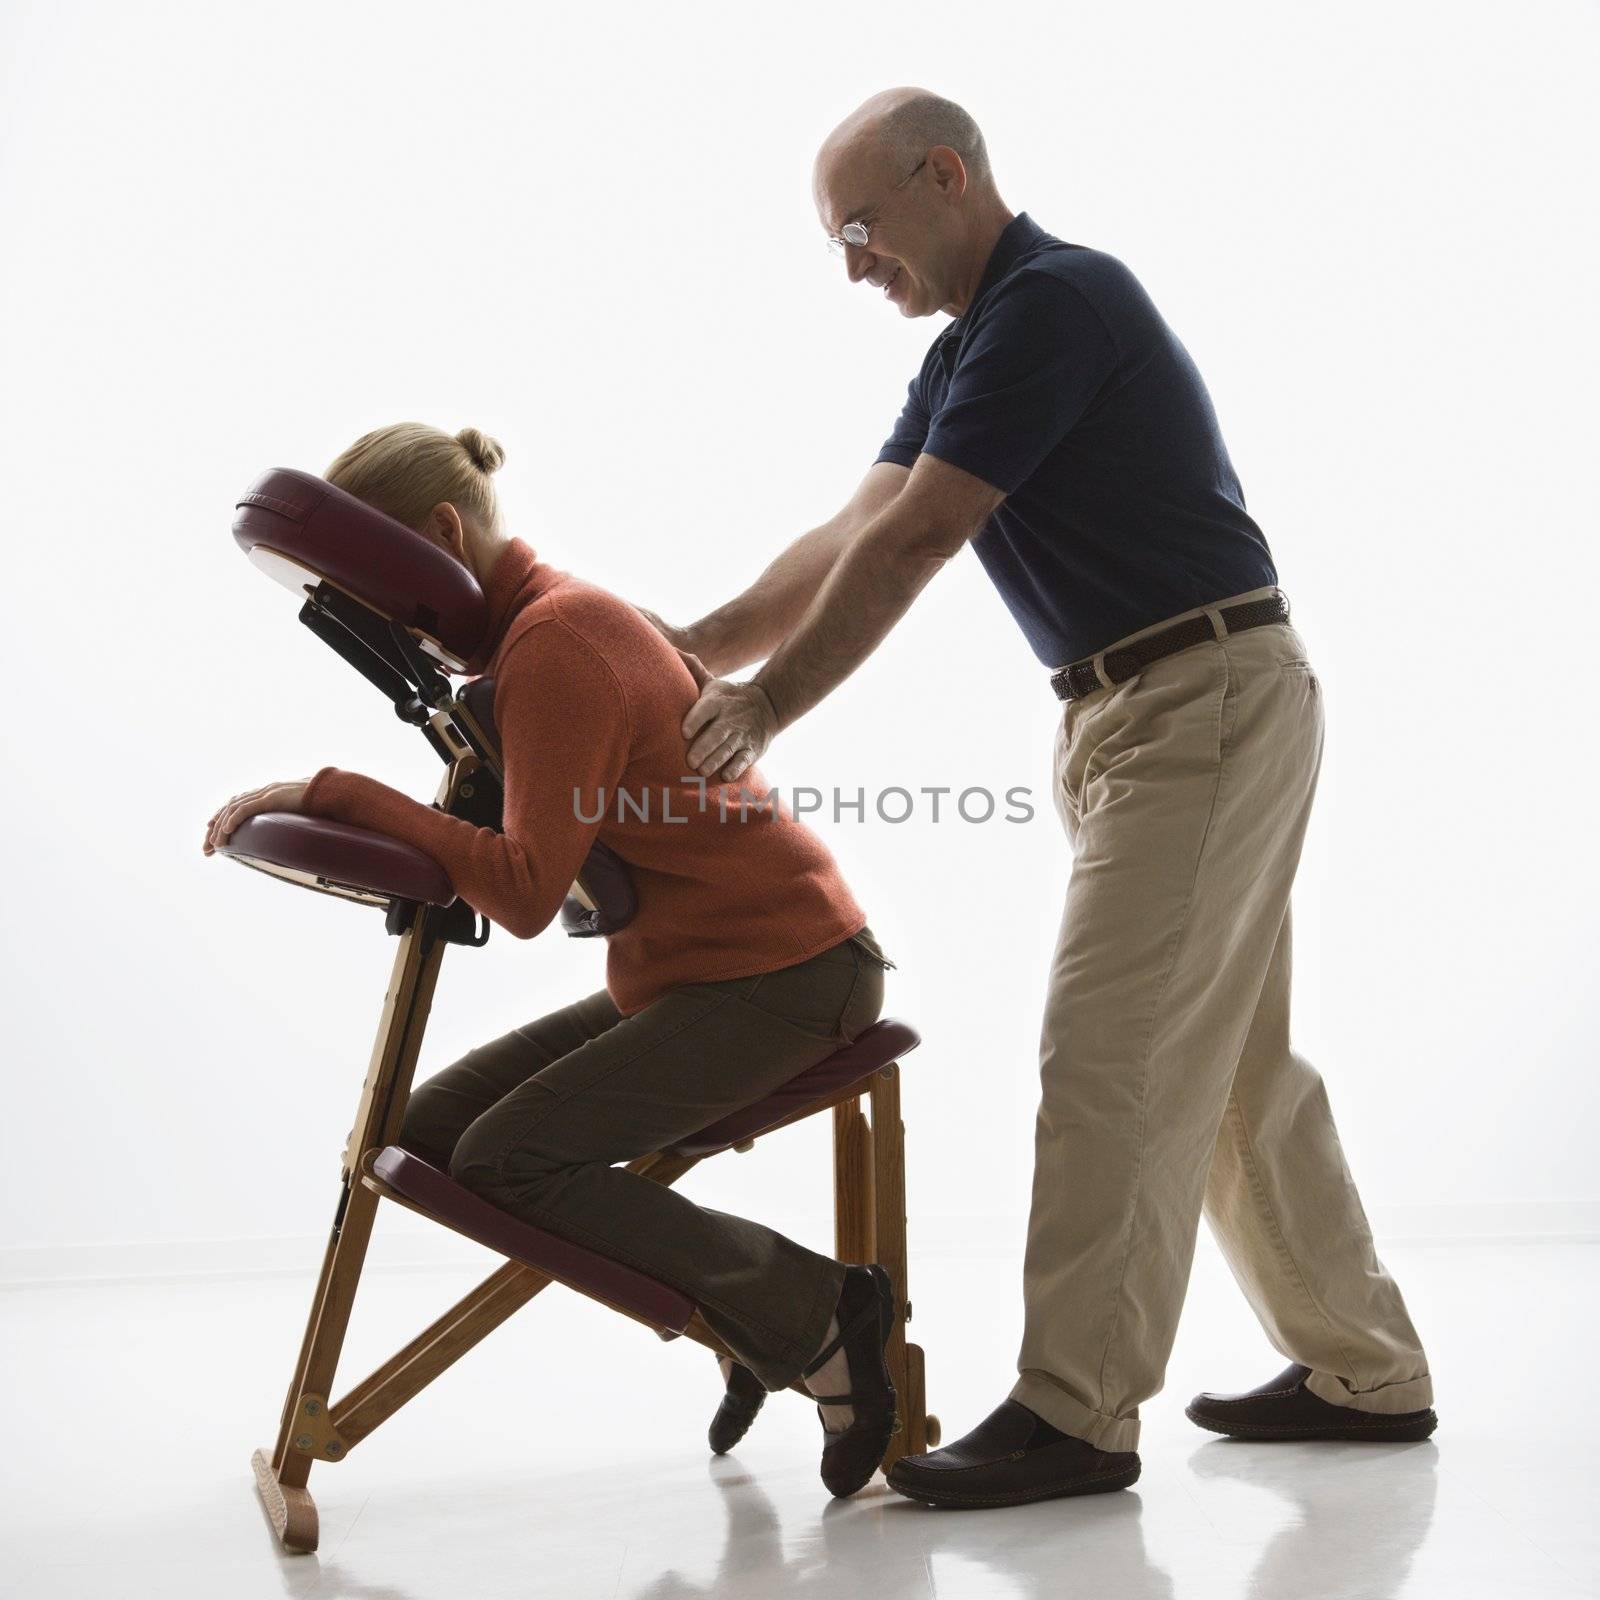 Caucasian middle-aged male massage therapist massaging back of Caucasian middle-aged woman sitting in massage chair.